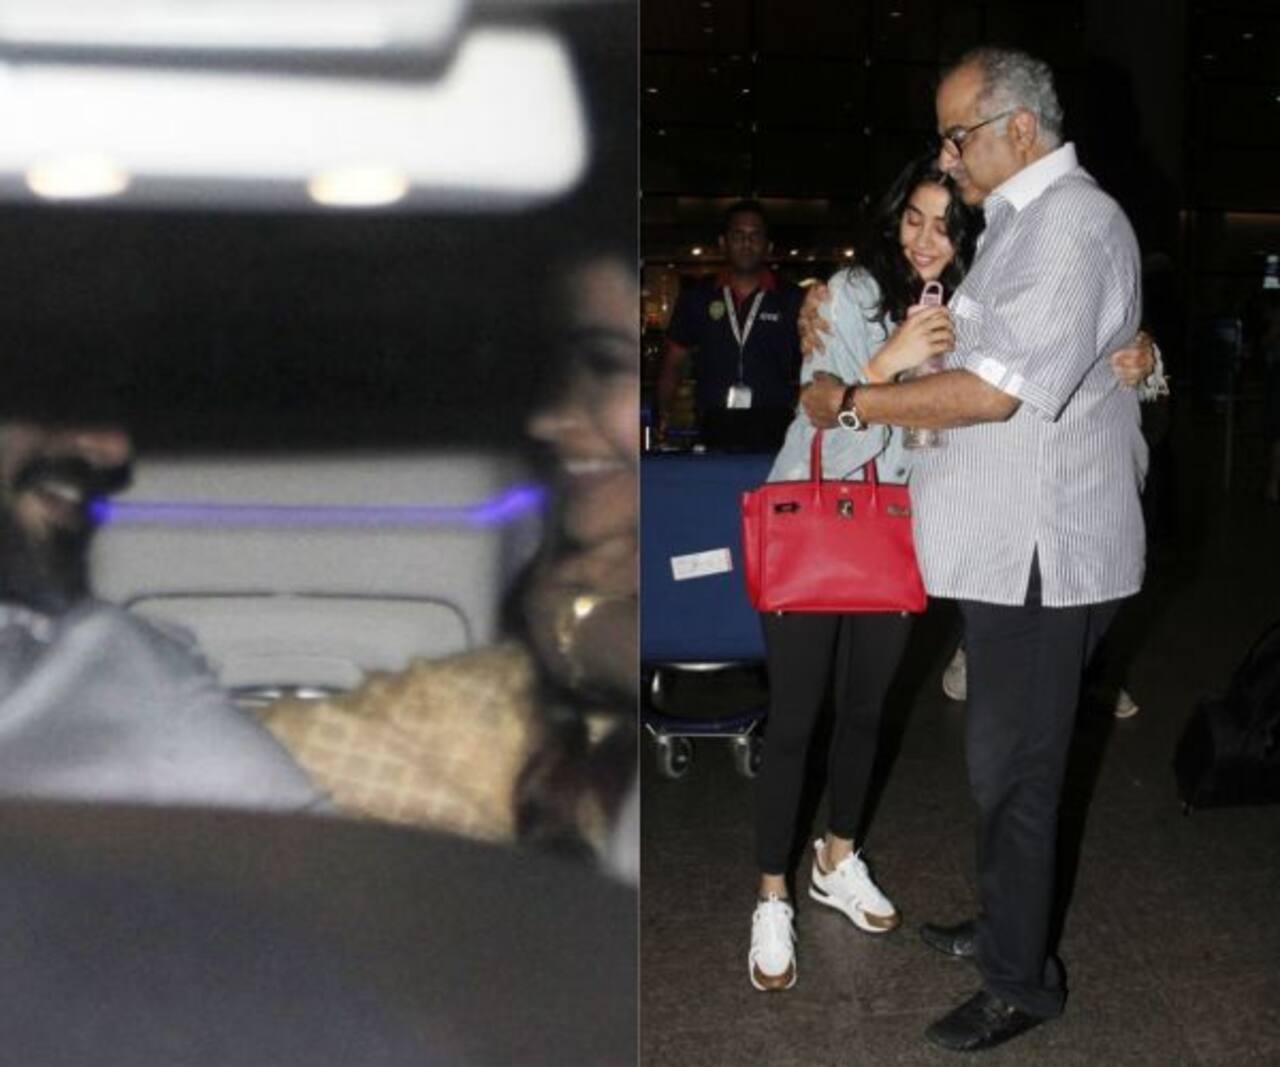 Sonam Kapoor and Boney Kapoor come to pick up their loved ones Anand Ahuja and Janhvi Kapoor, giving us some really adorable pics